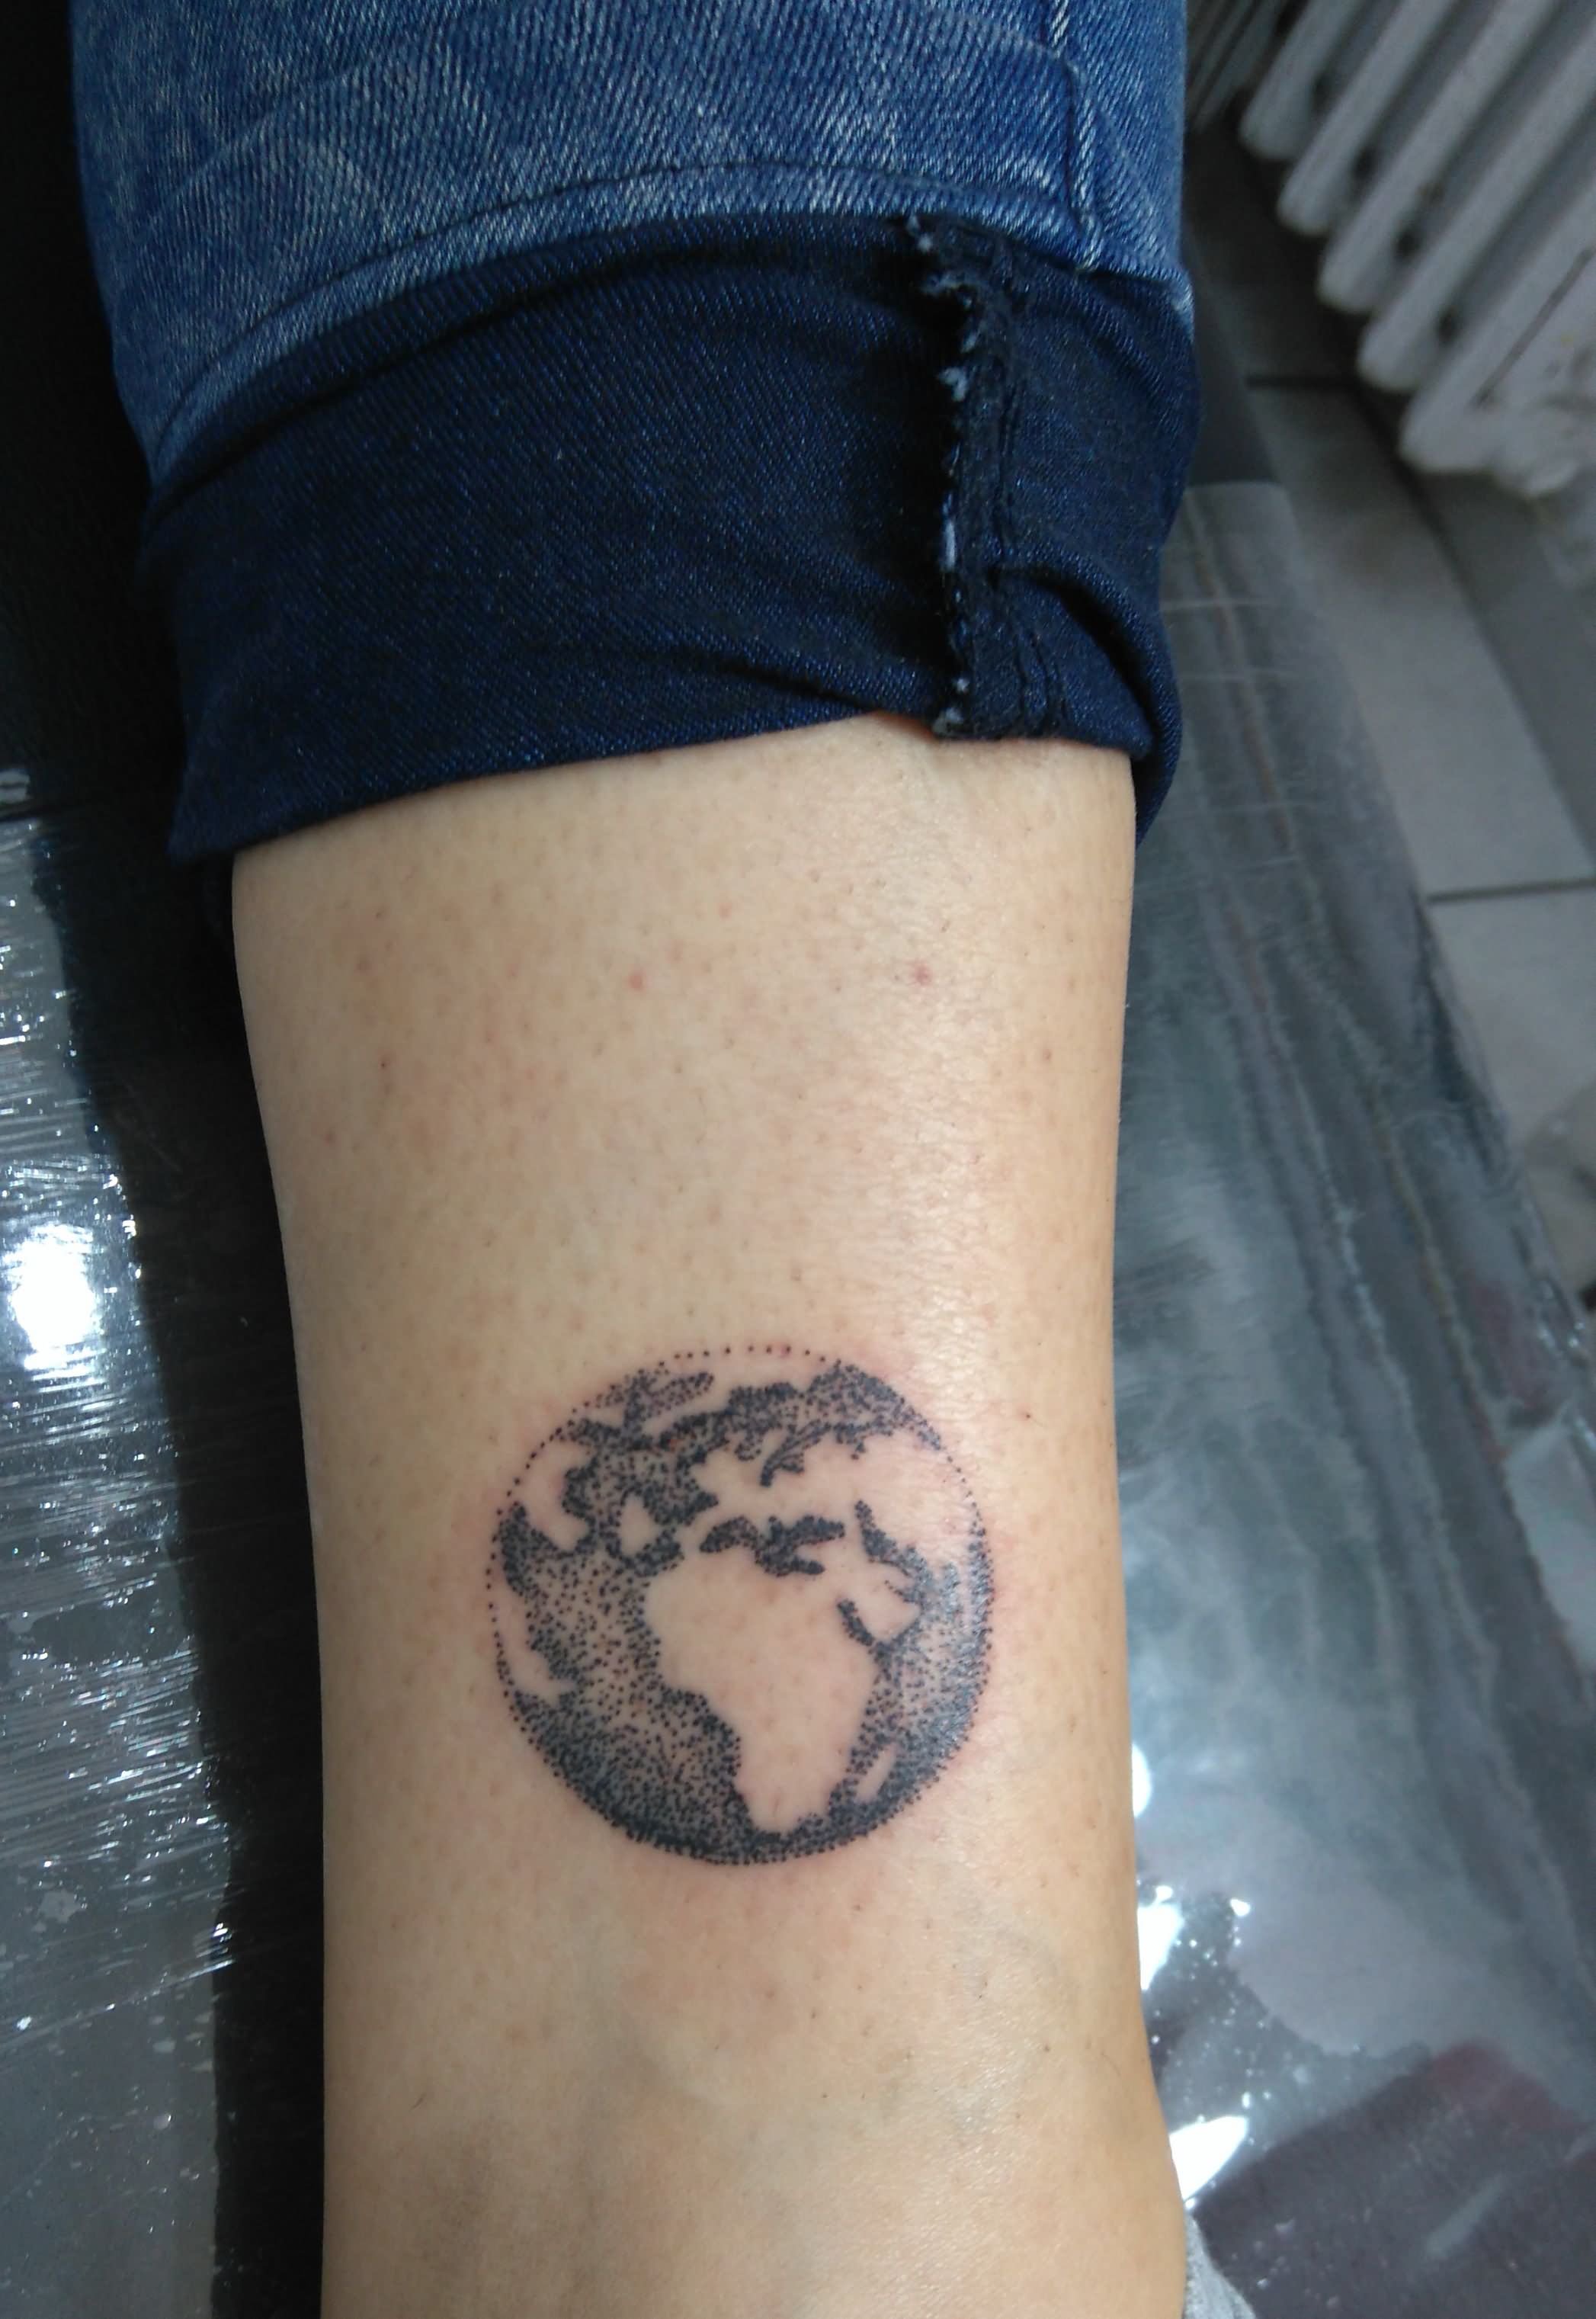 Black and white shaded earth tattoo on inner arm